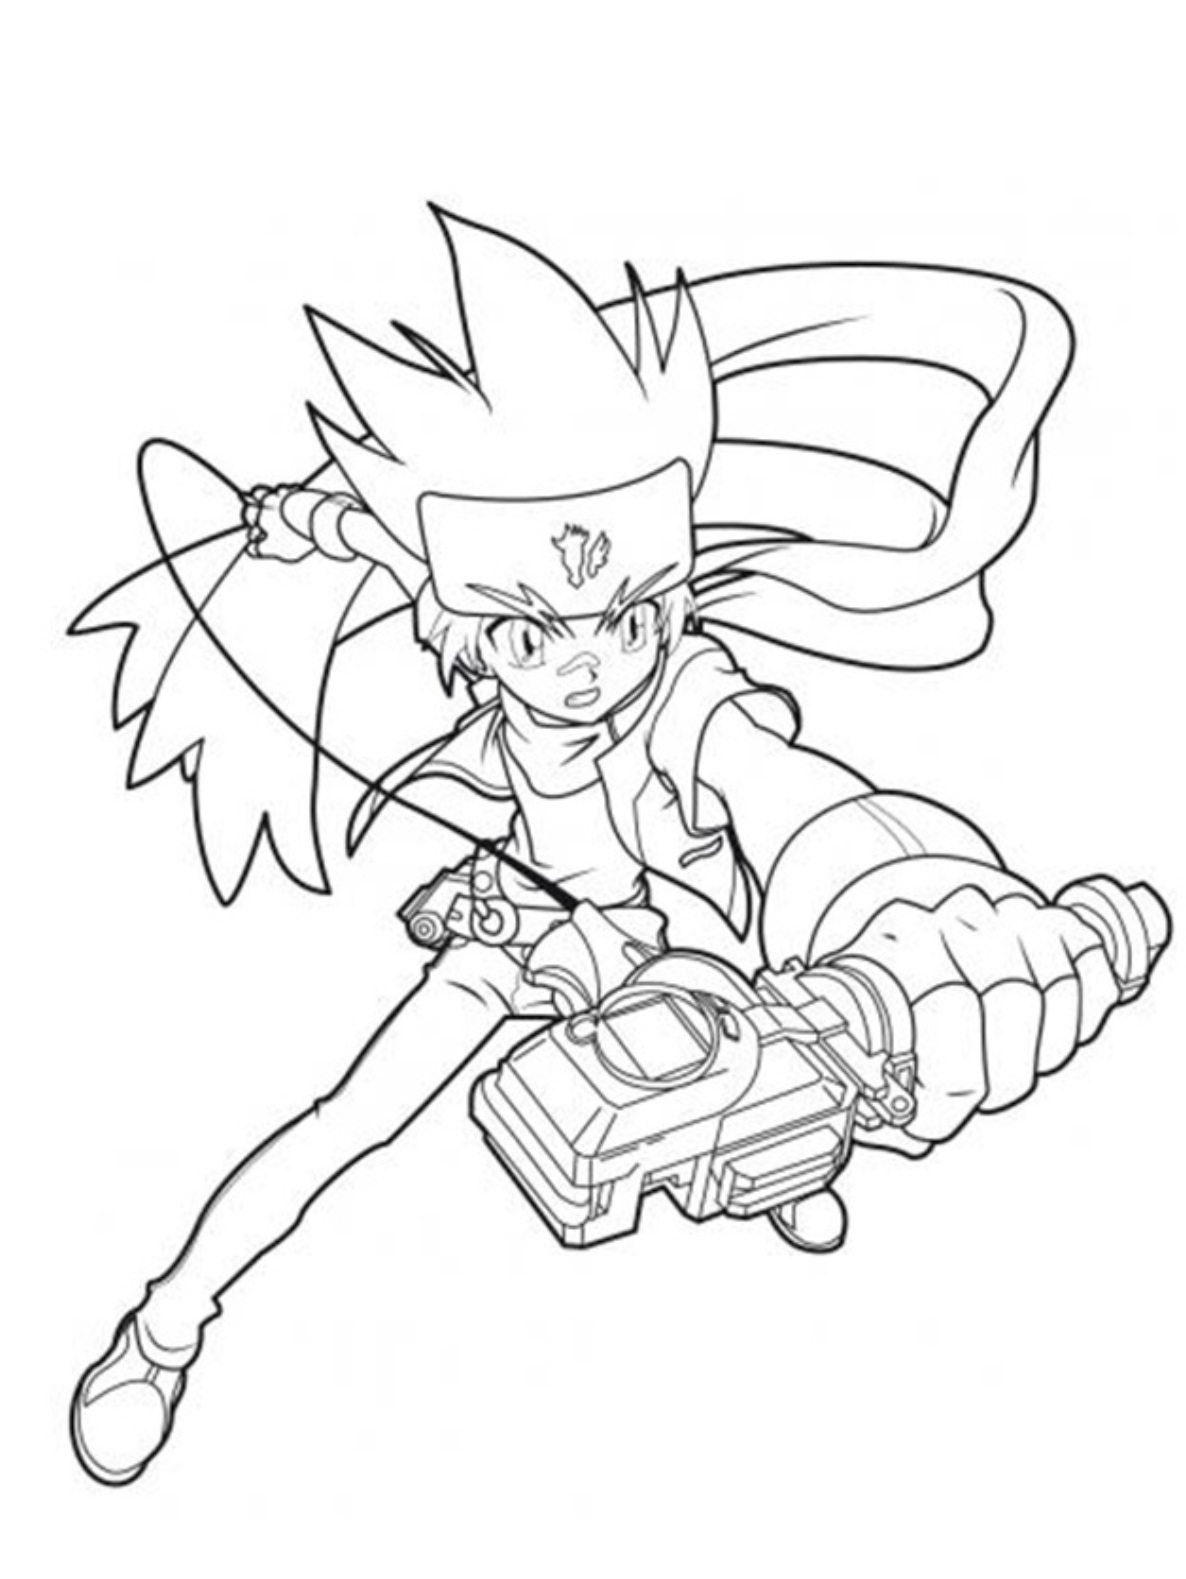 beyblade-coloring-pages-to-download-and-print-for-free